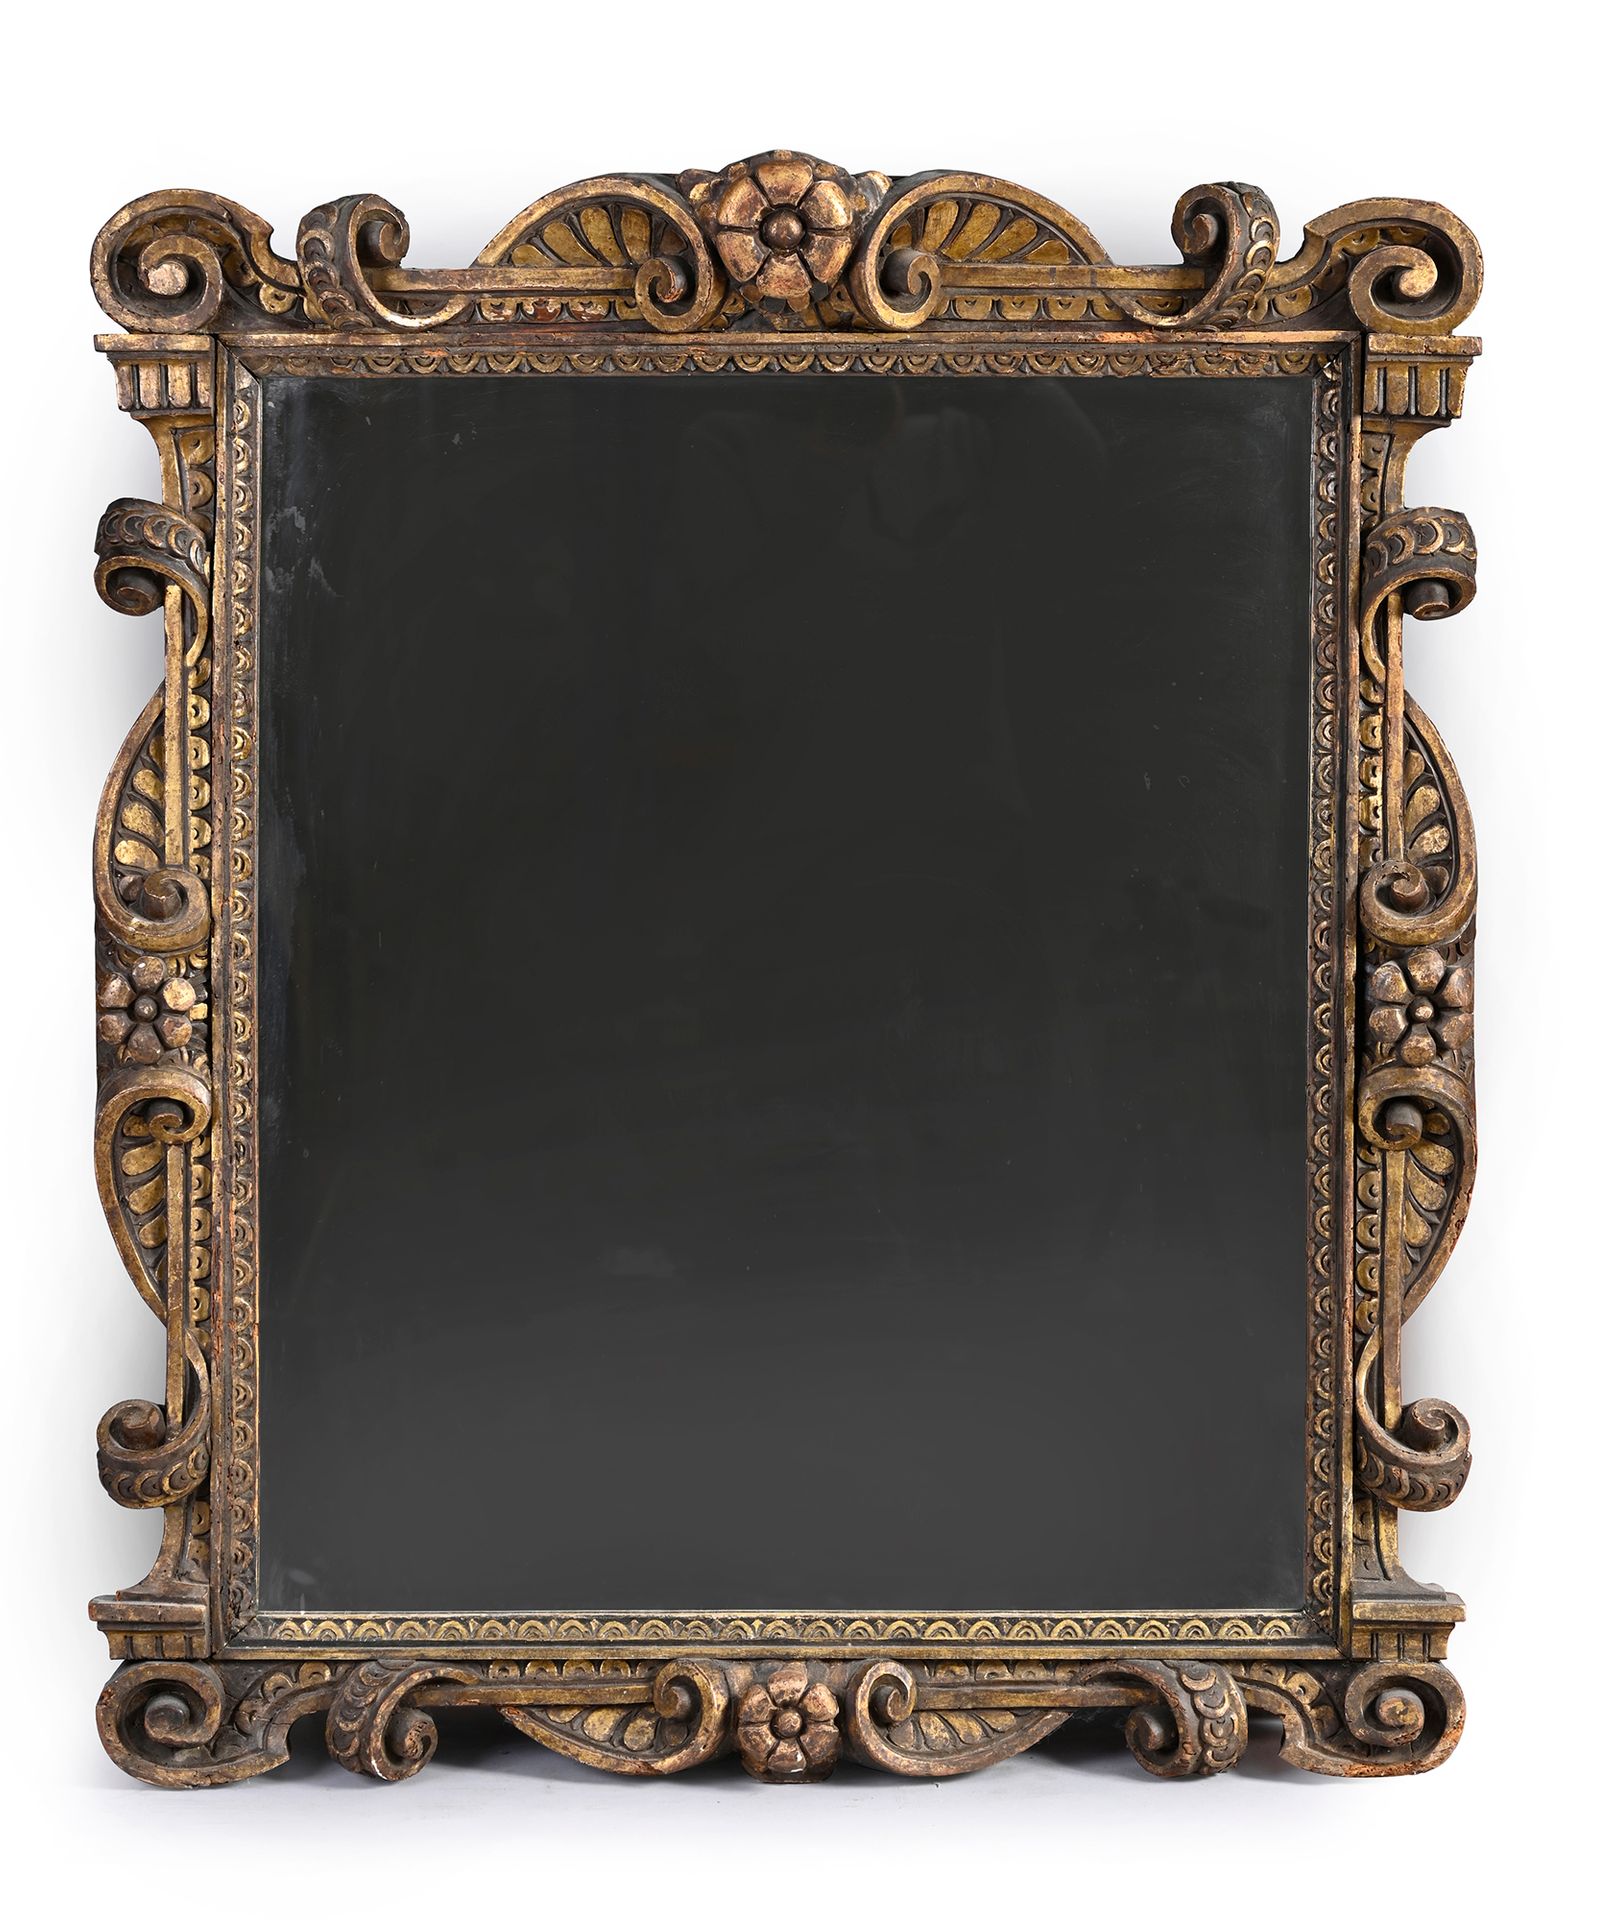 Null Framed in the Sansovino style in carved, blackened and gilded resinous wood&hellip;